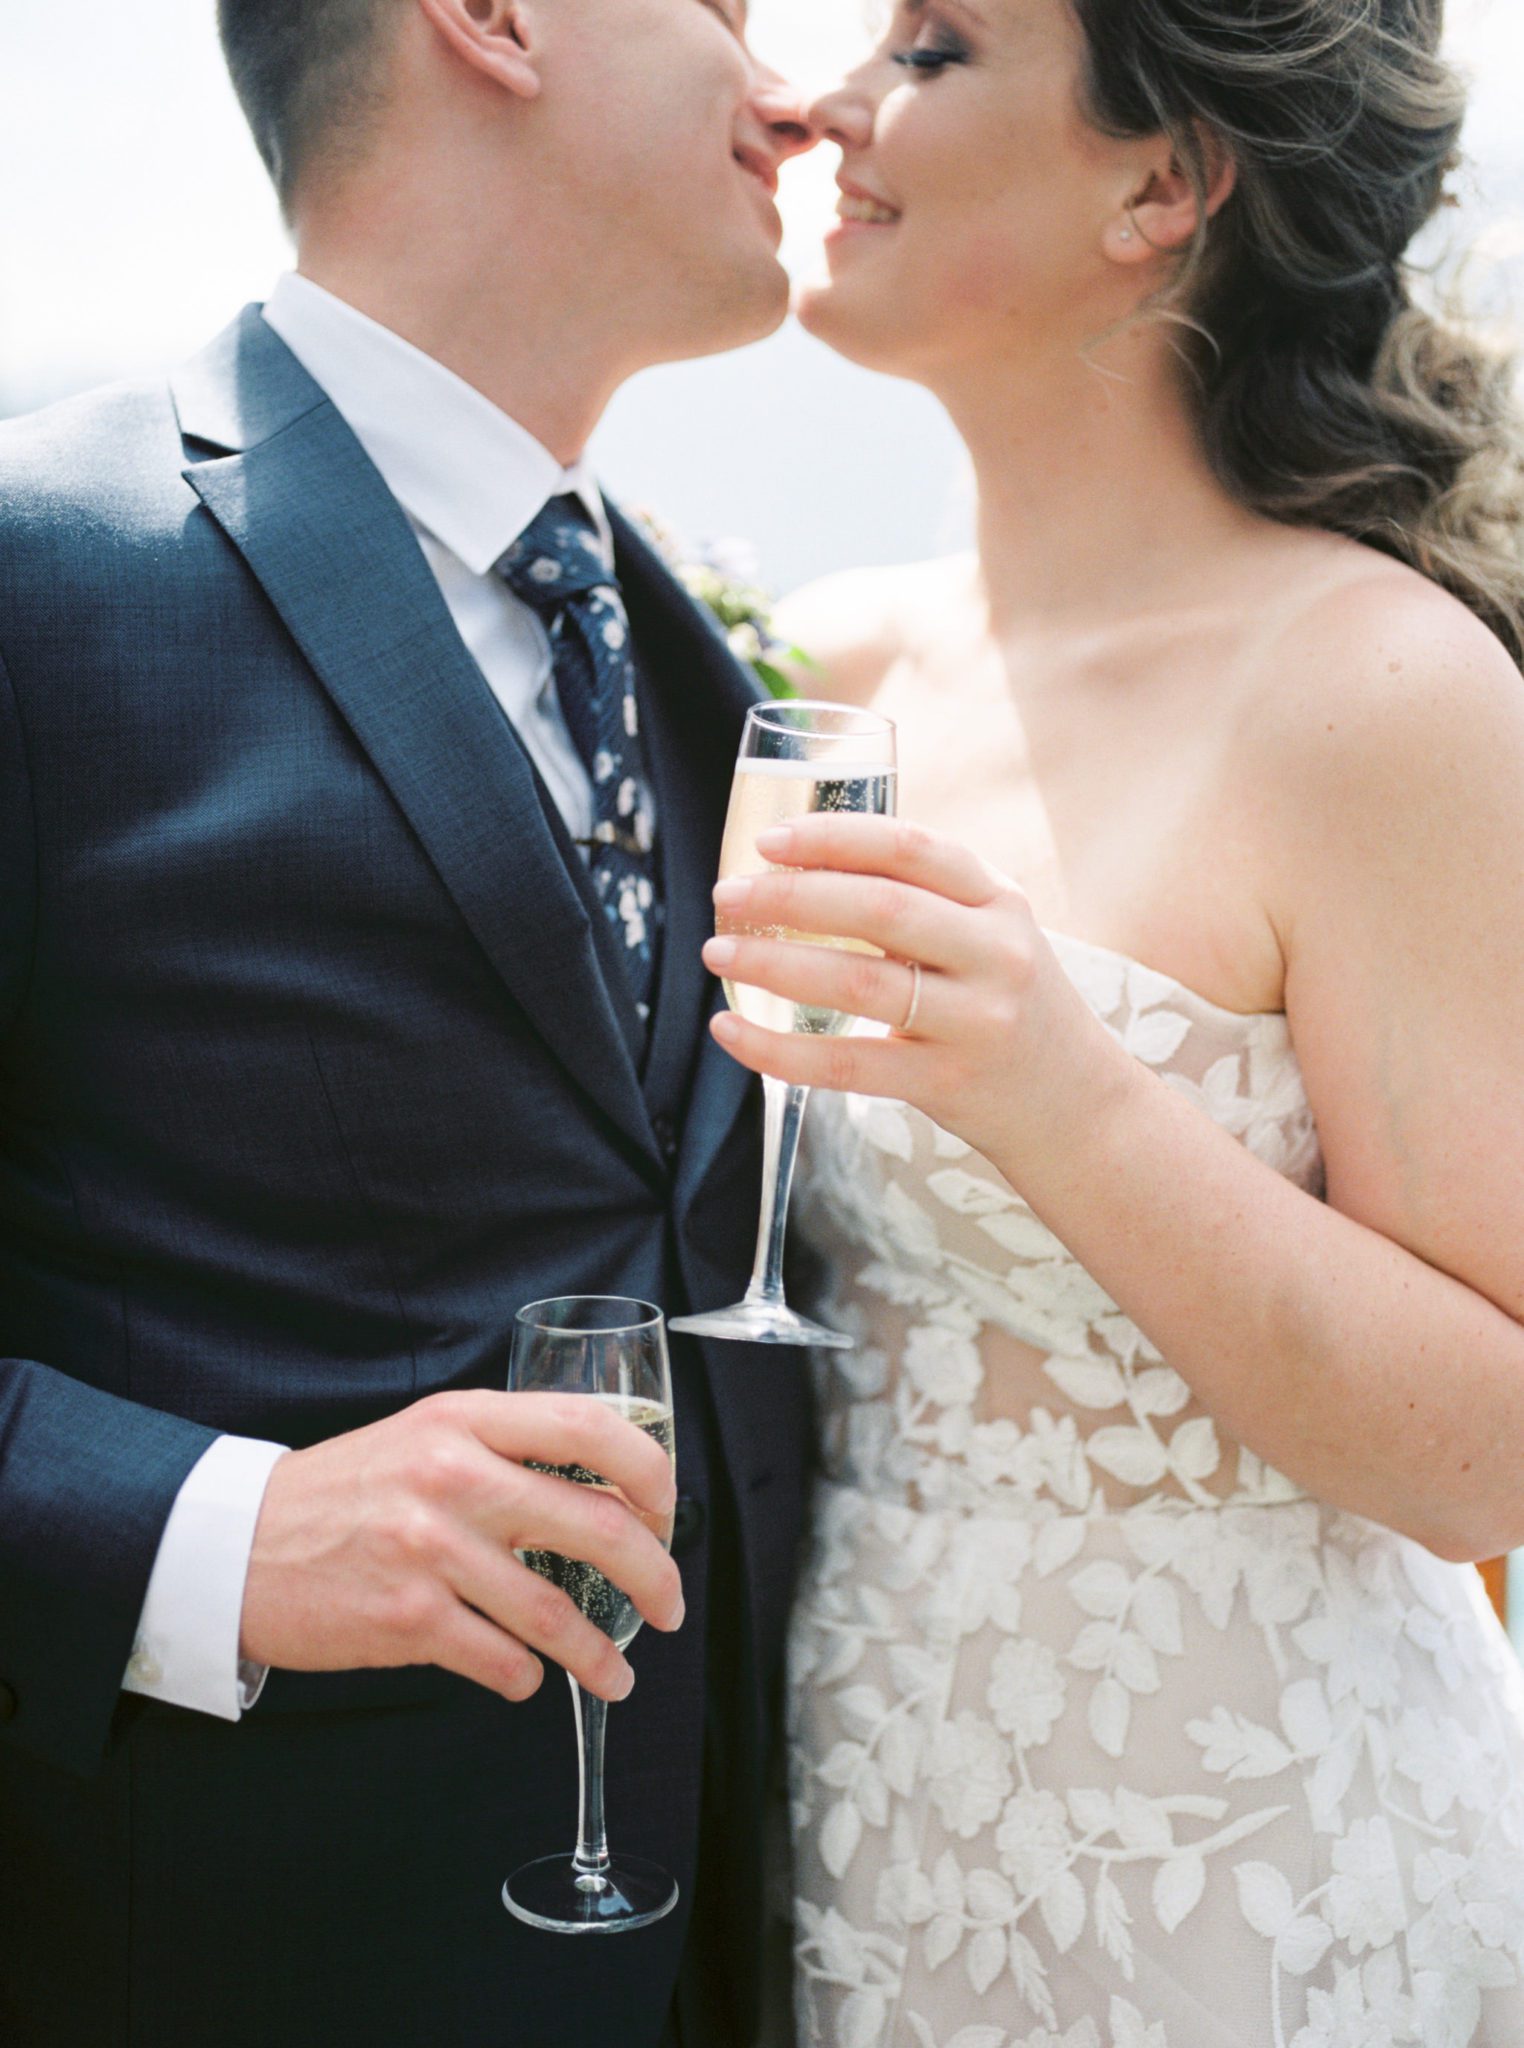 Newly weds share a glass of champagne 